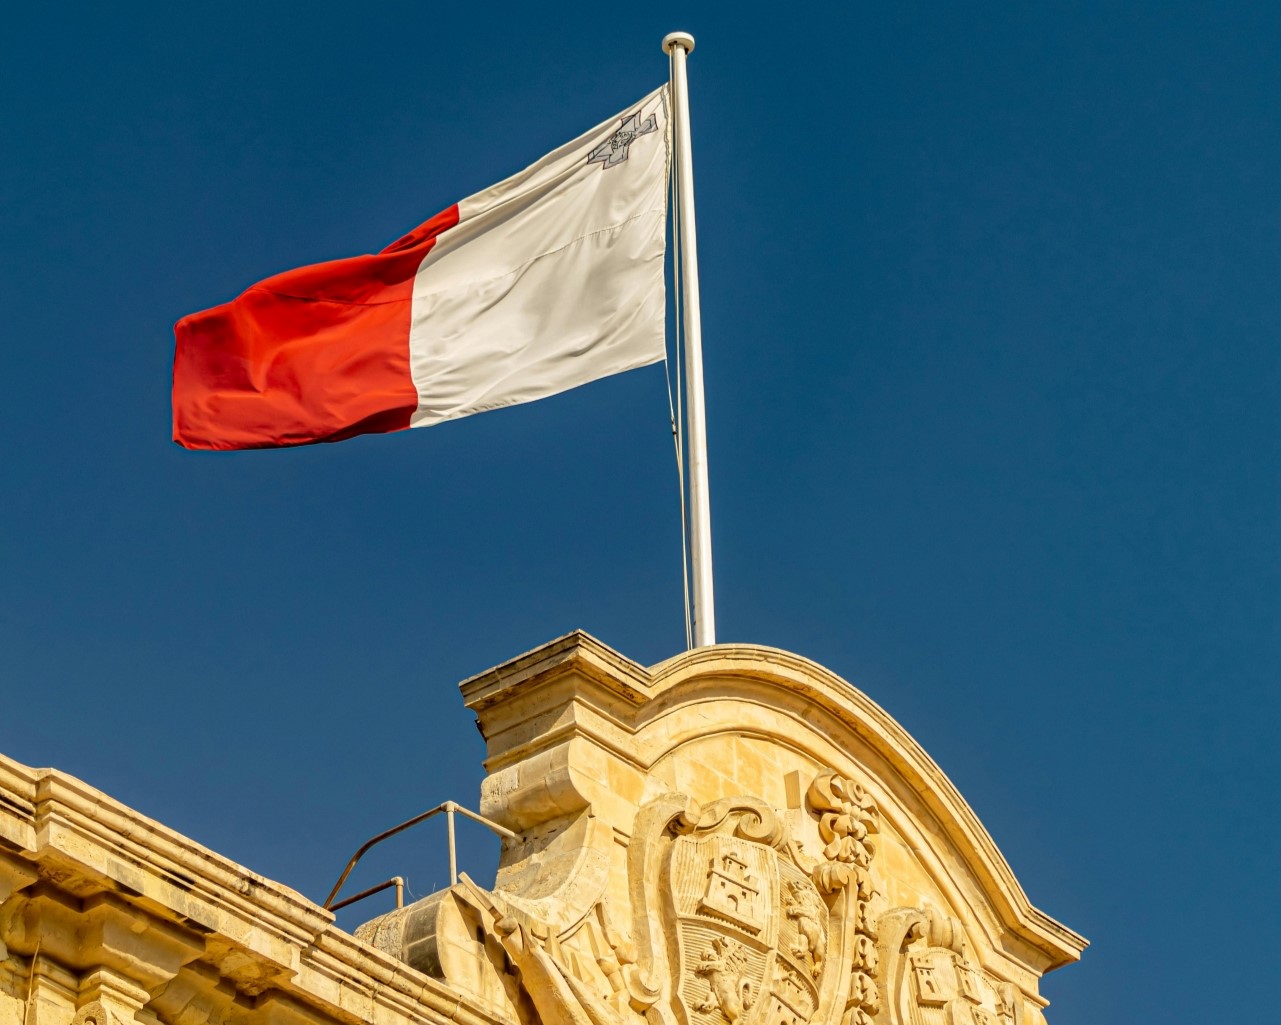 This picture shows a flag of Malta with the white and red colors on top of a stone building.